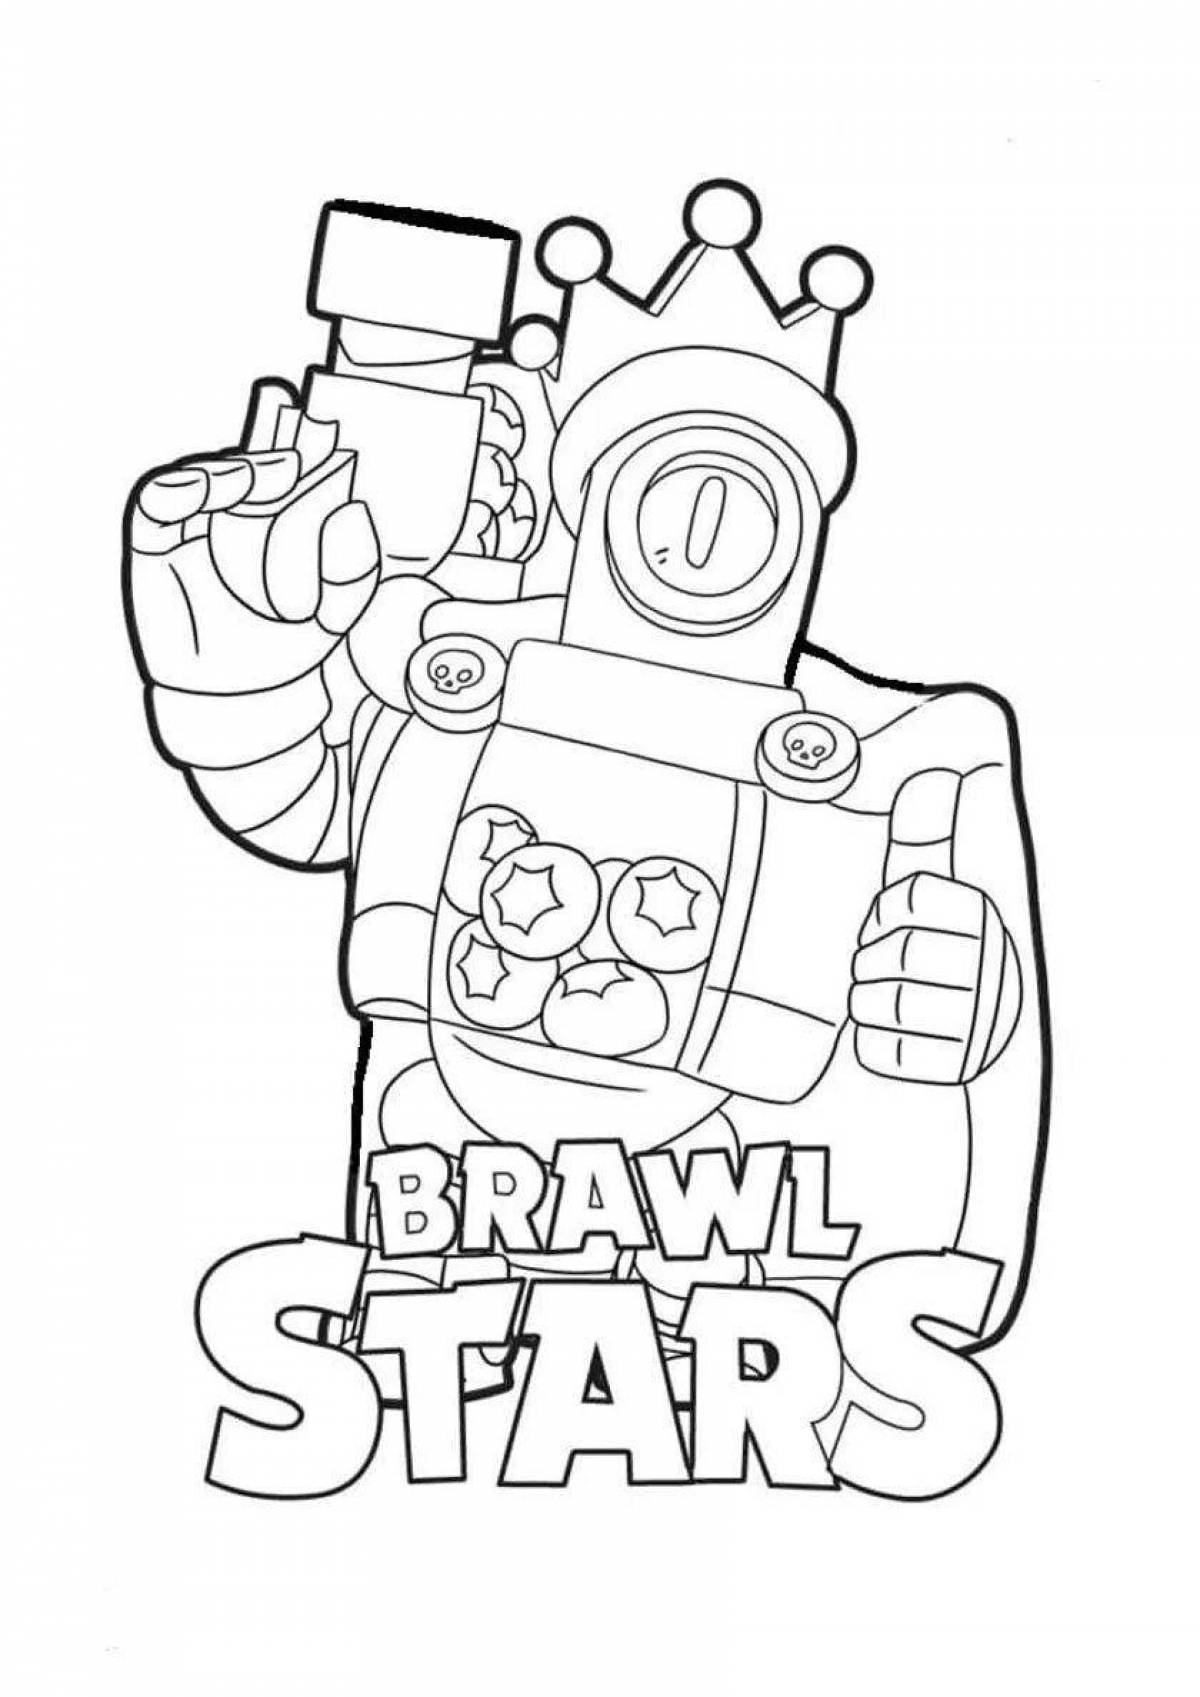 Coloring page glowing eyebrow star